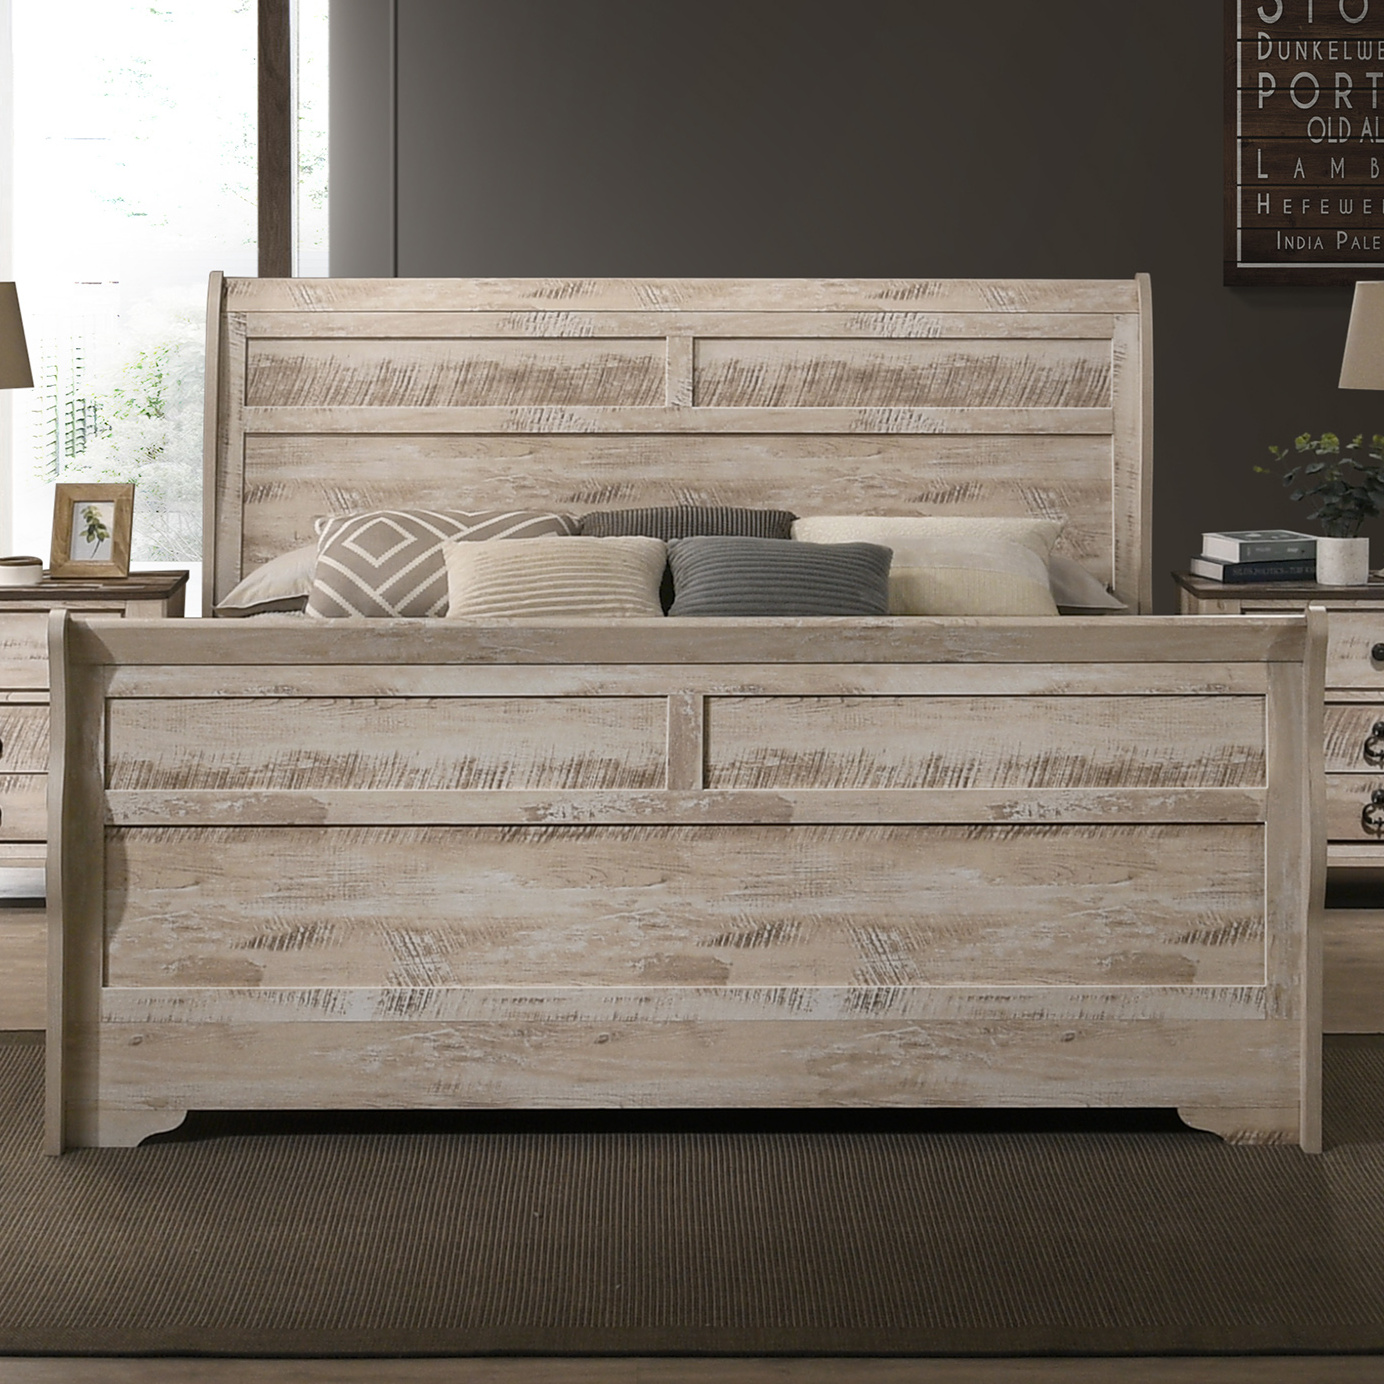 Imerland Contemporary White Wash Finish Bedroom Set with Queen Sleigh Bed, Dresser, Mirror, Two Nightstands - image 5 of 11